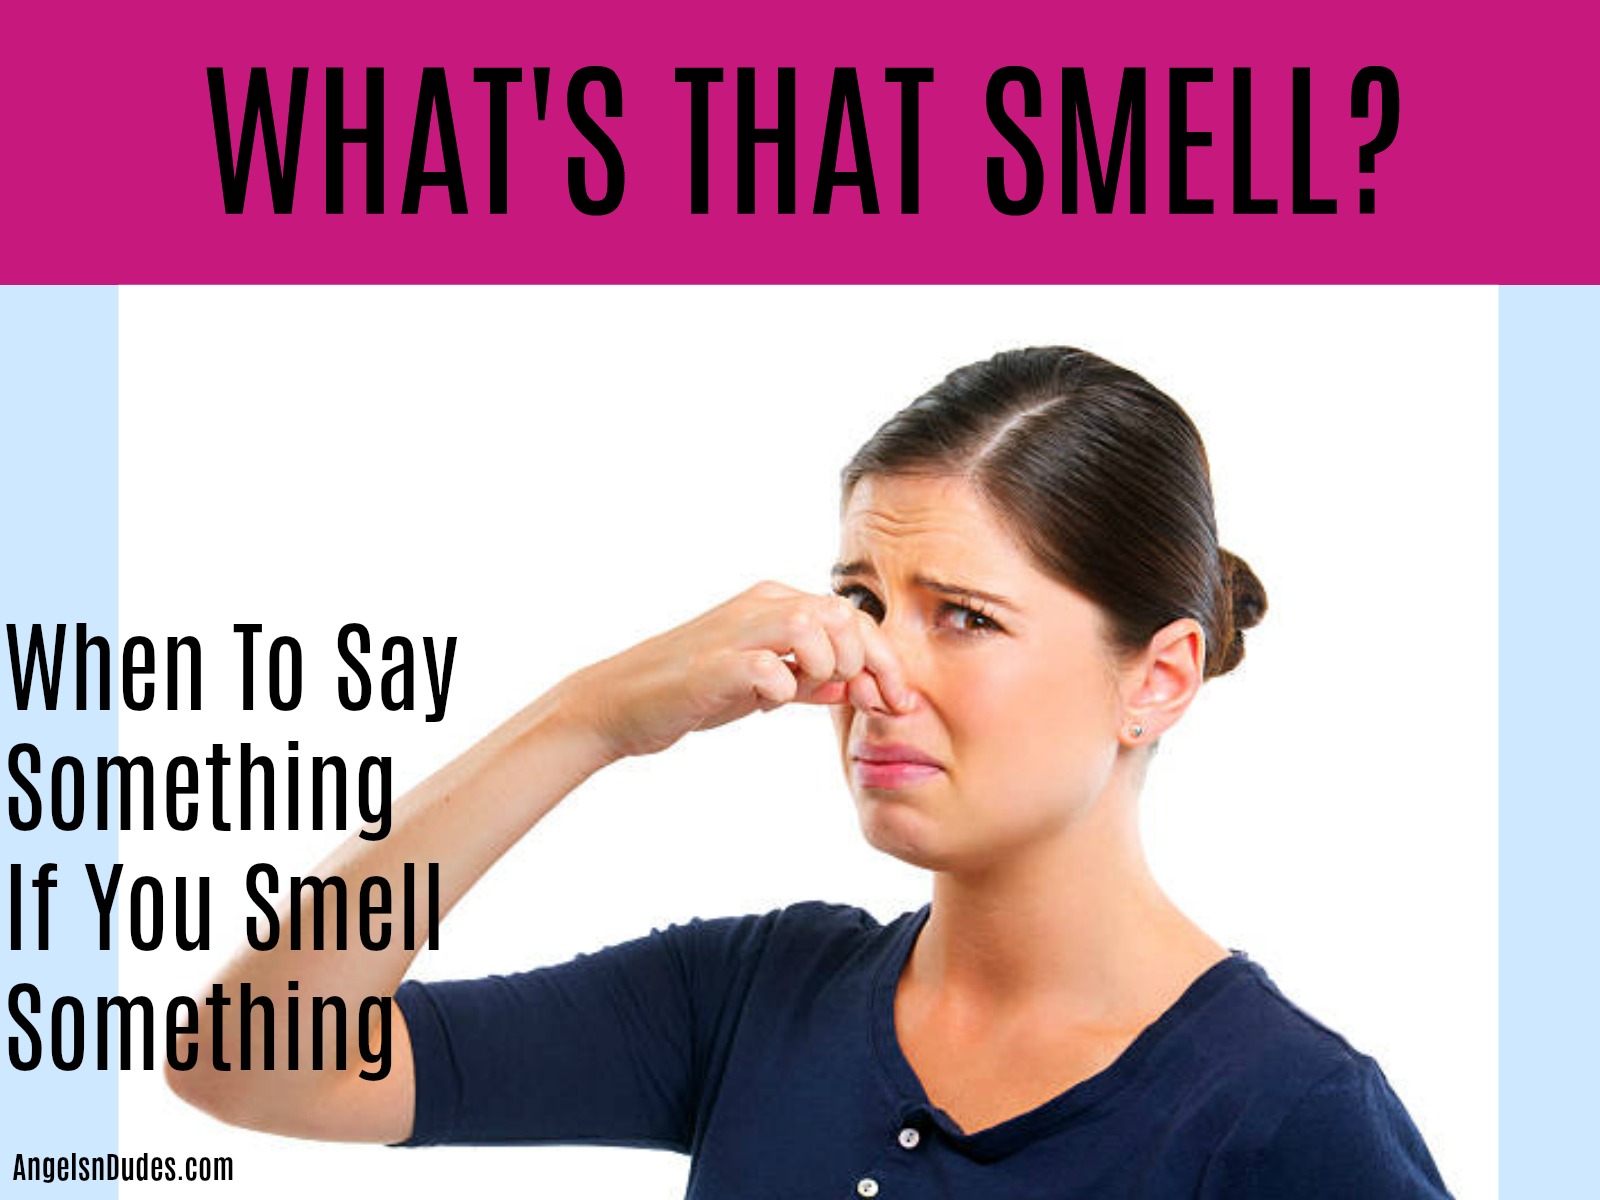 Kids and Body Odor When to Say Something If You Smell